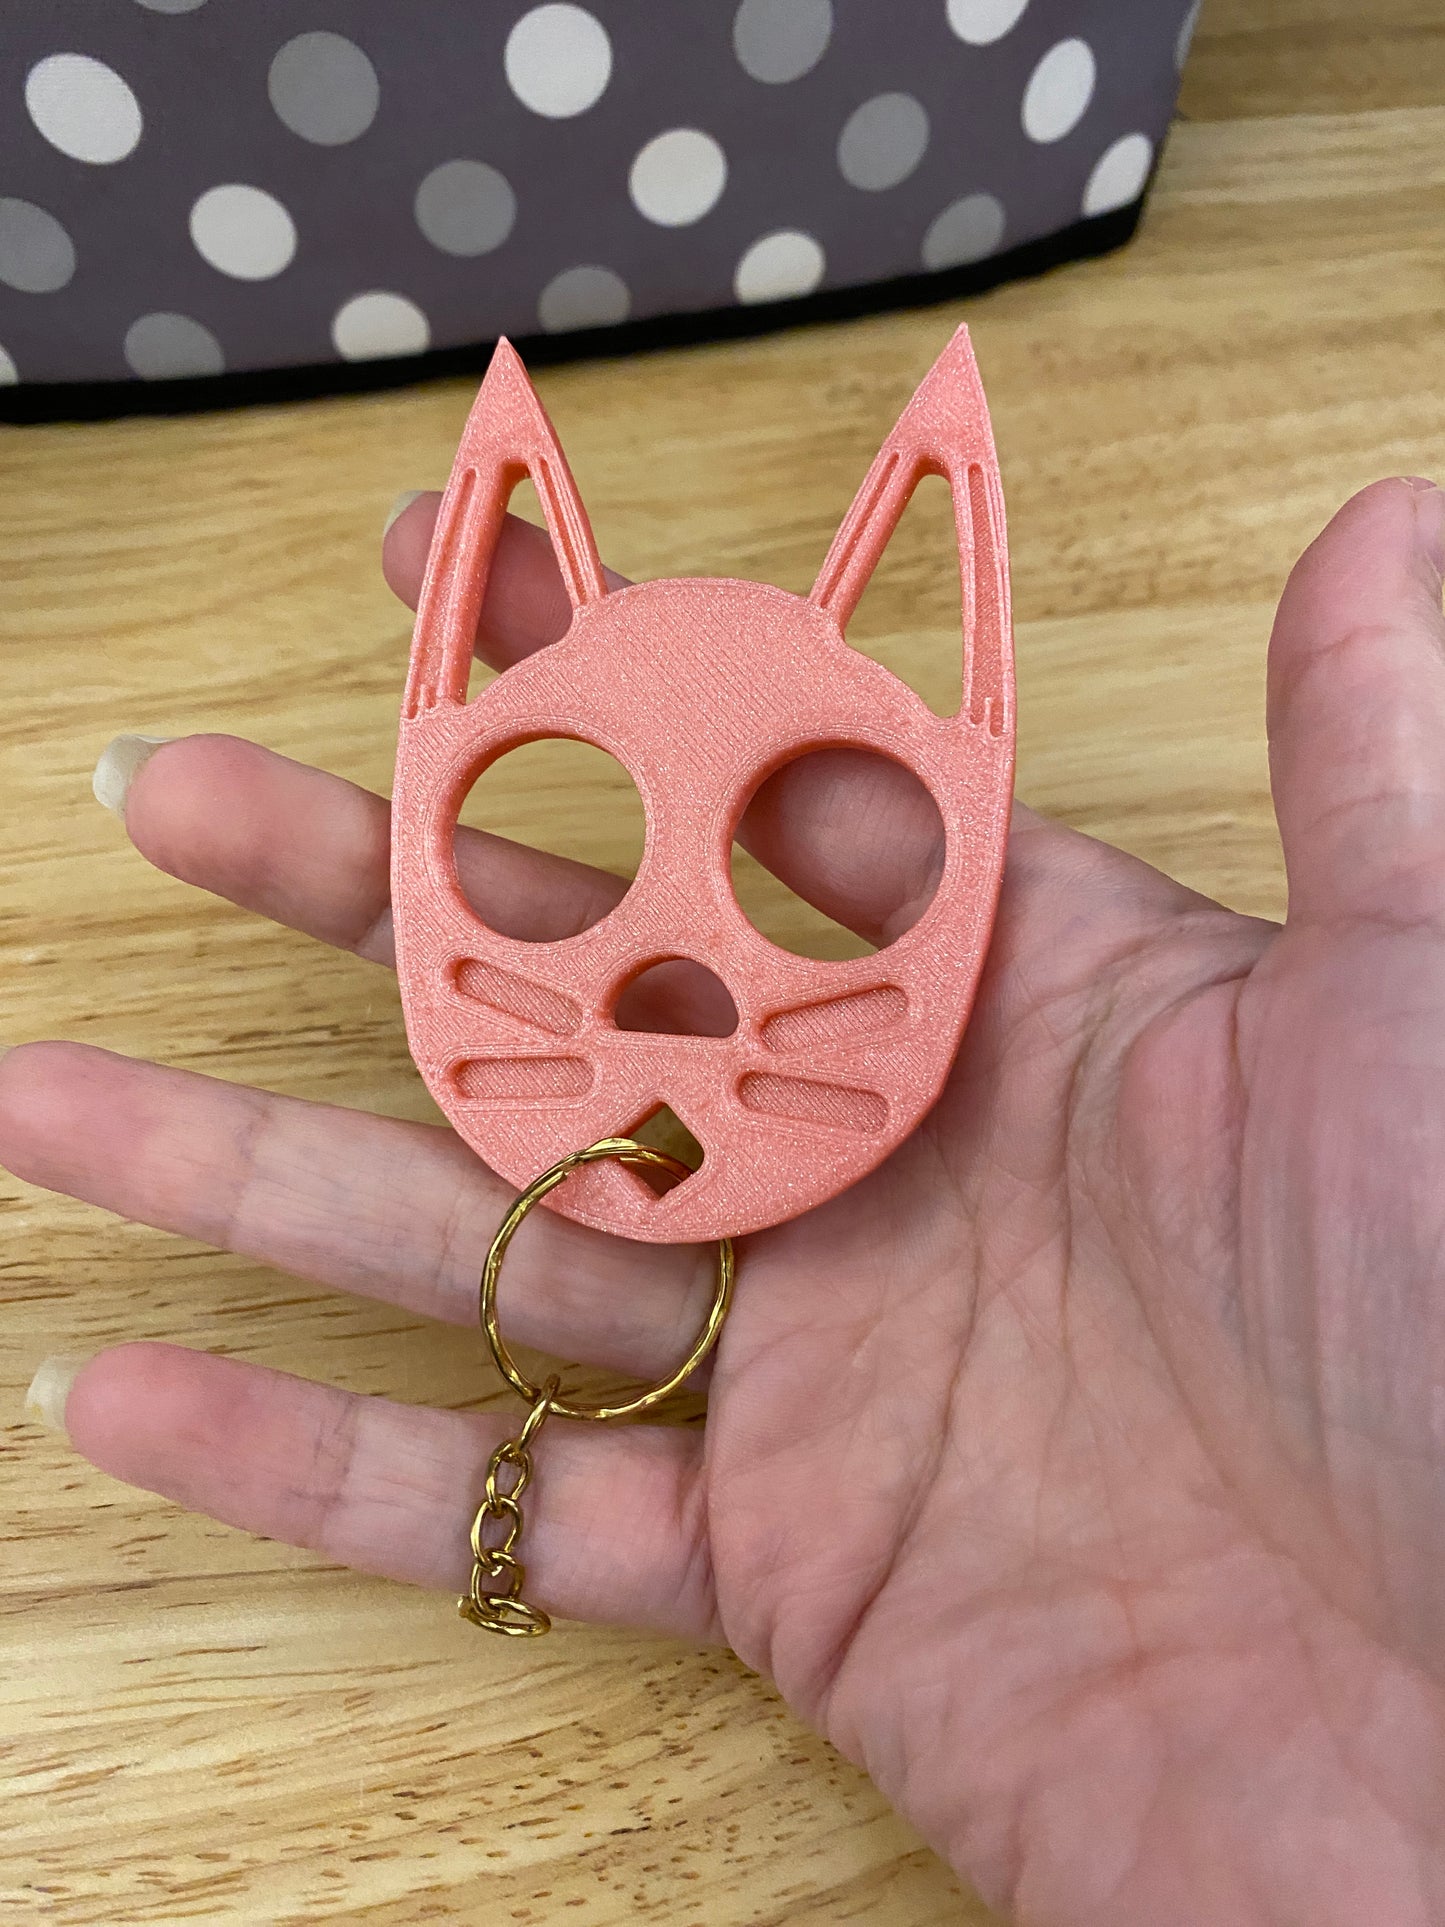 Cat Self Defense Key chain assembly required